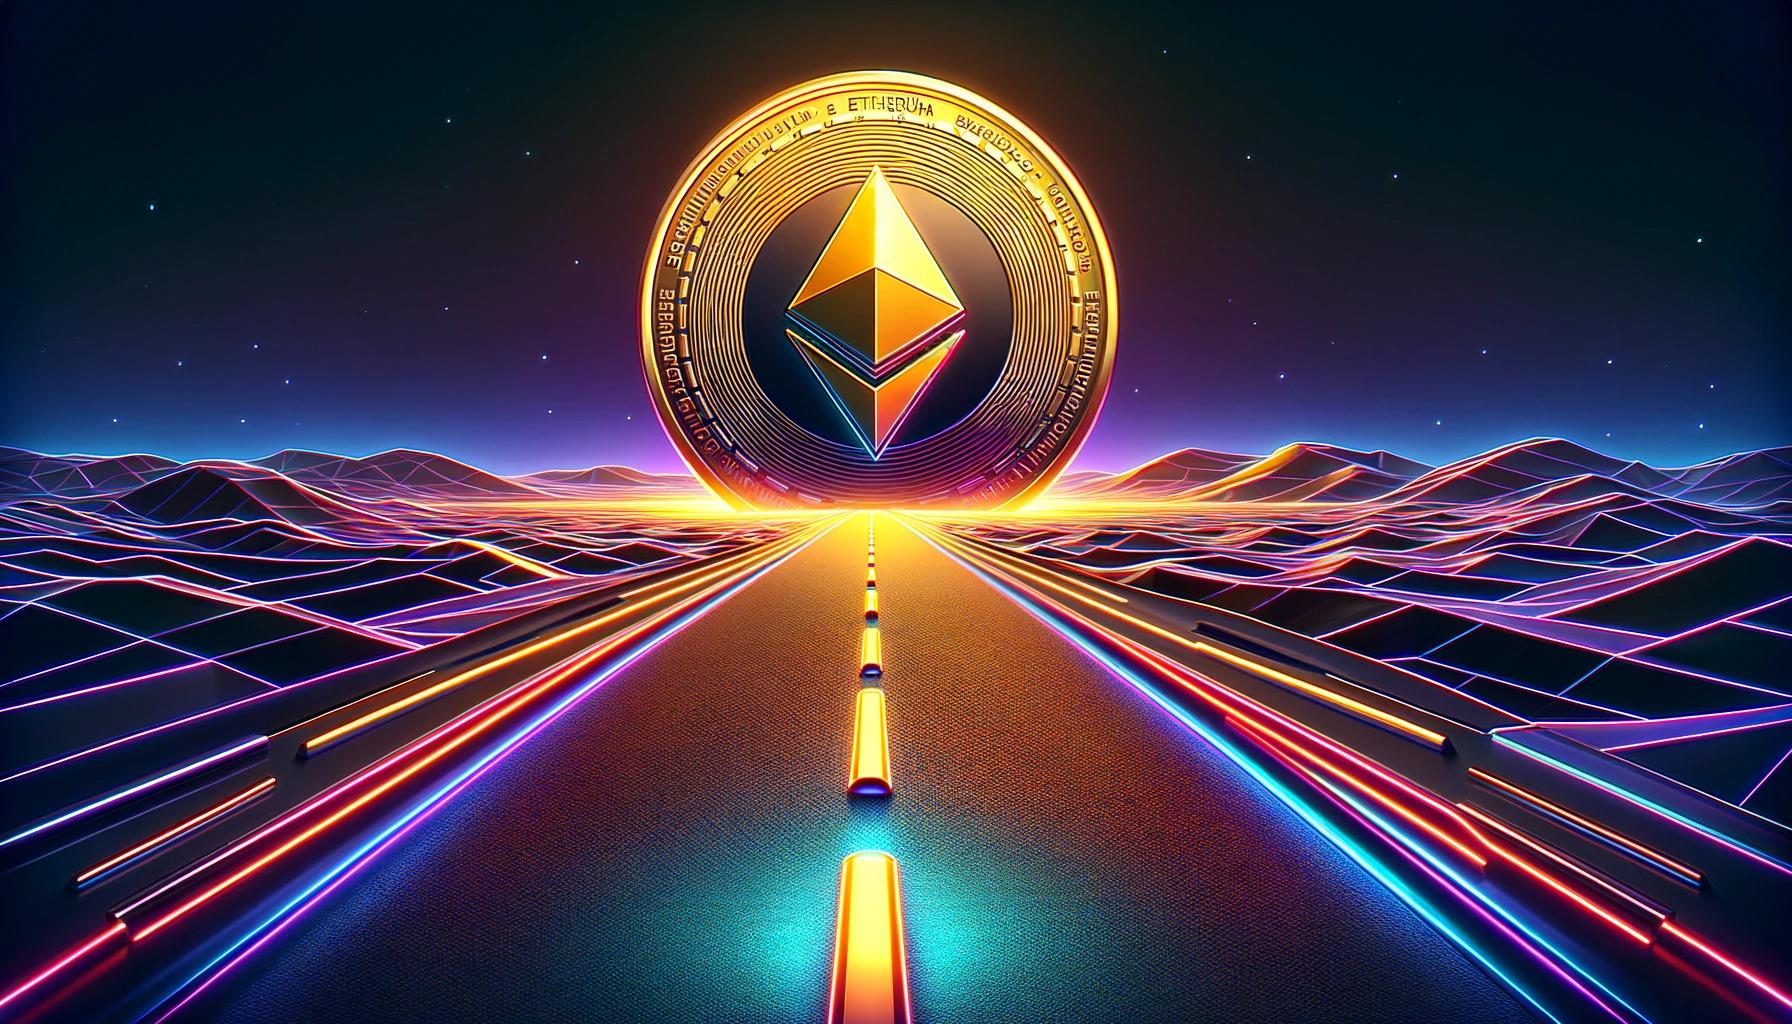 EtherFi Expedites Roadmap, Will Launch Token In Coming Days - The Defiant